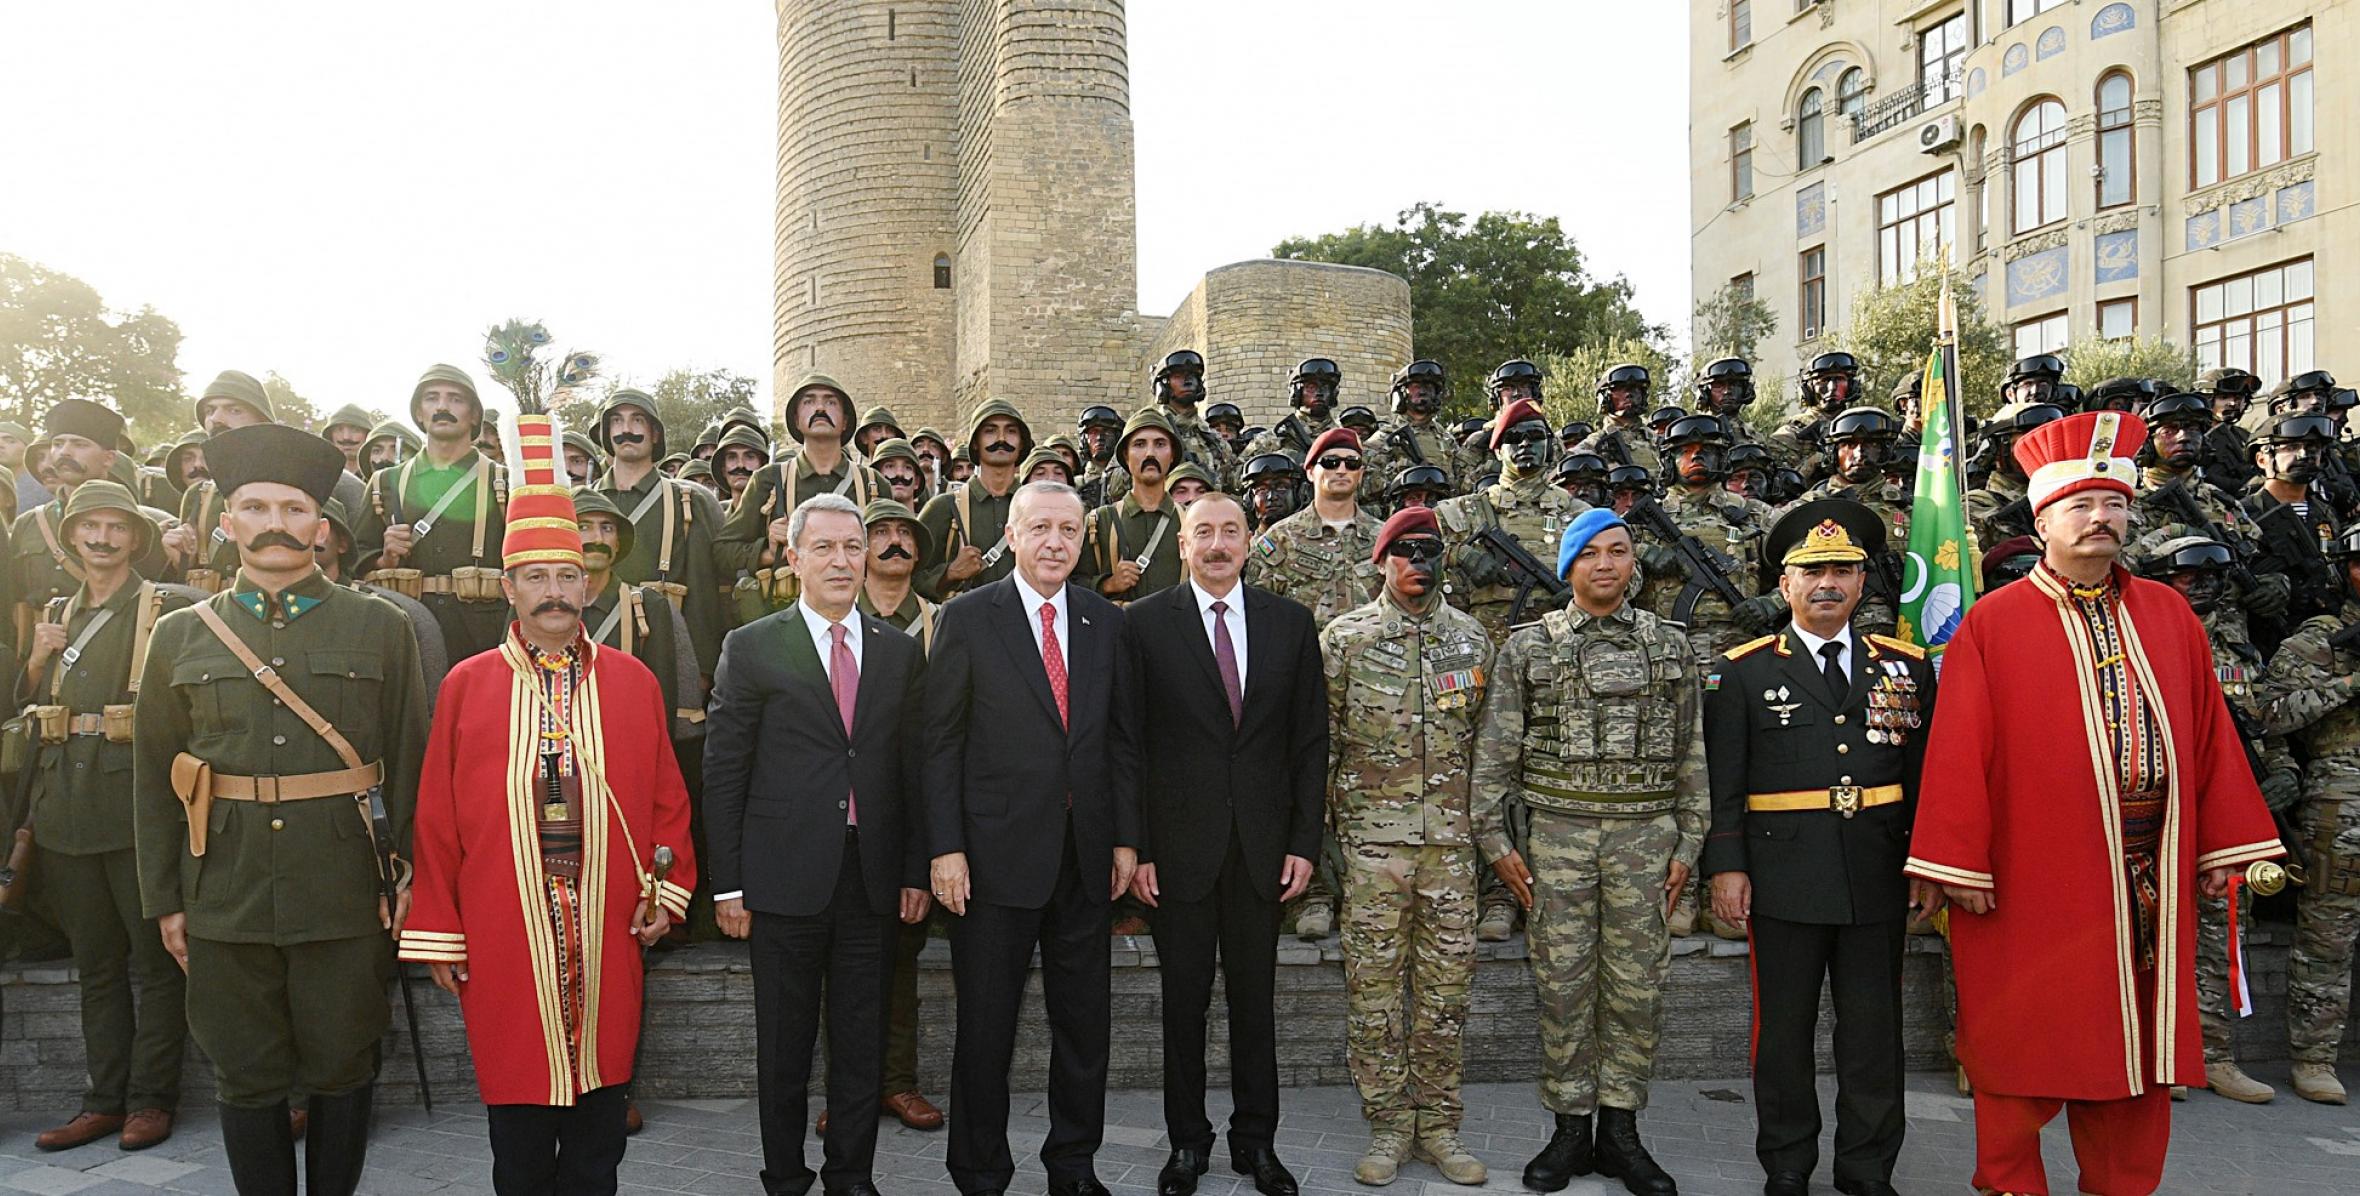 Azerbaijani, Turkish presidents posed for photographs together with parade participants